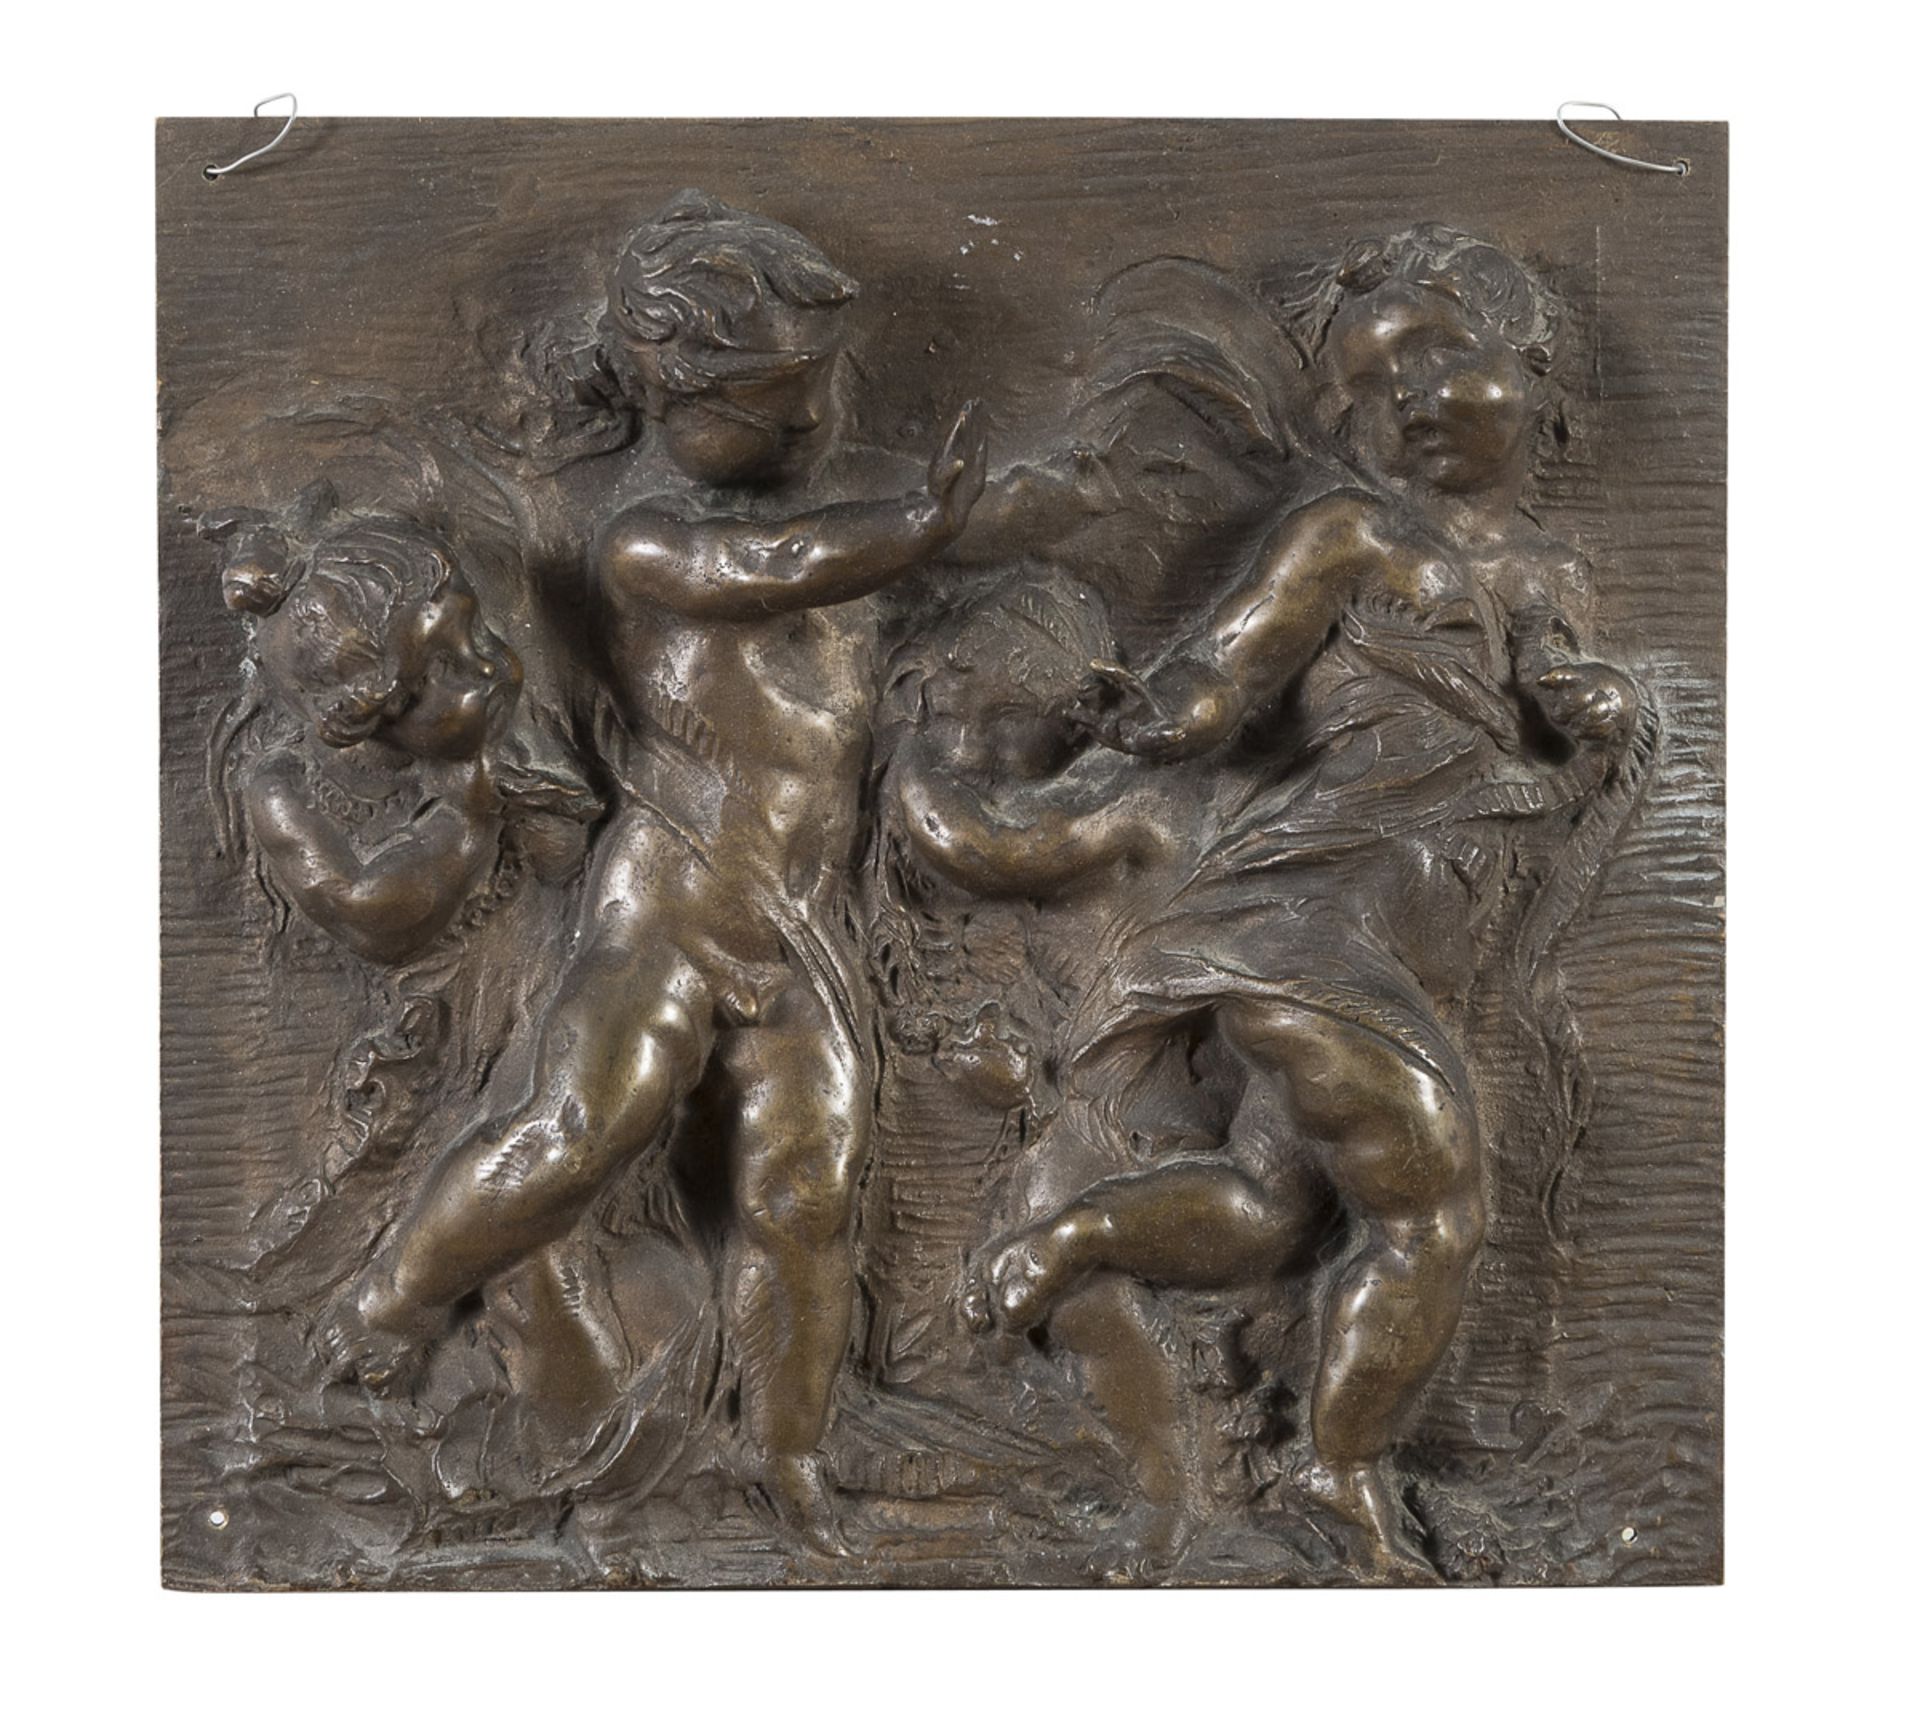 PAIR OF BRONZE HIGH-RELIEFS LATE 19th CENTURY